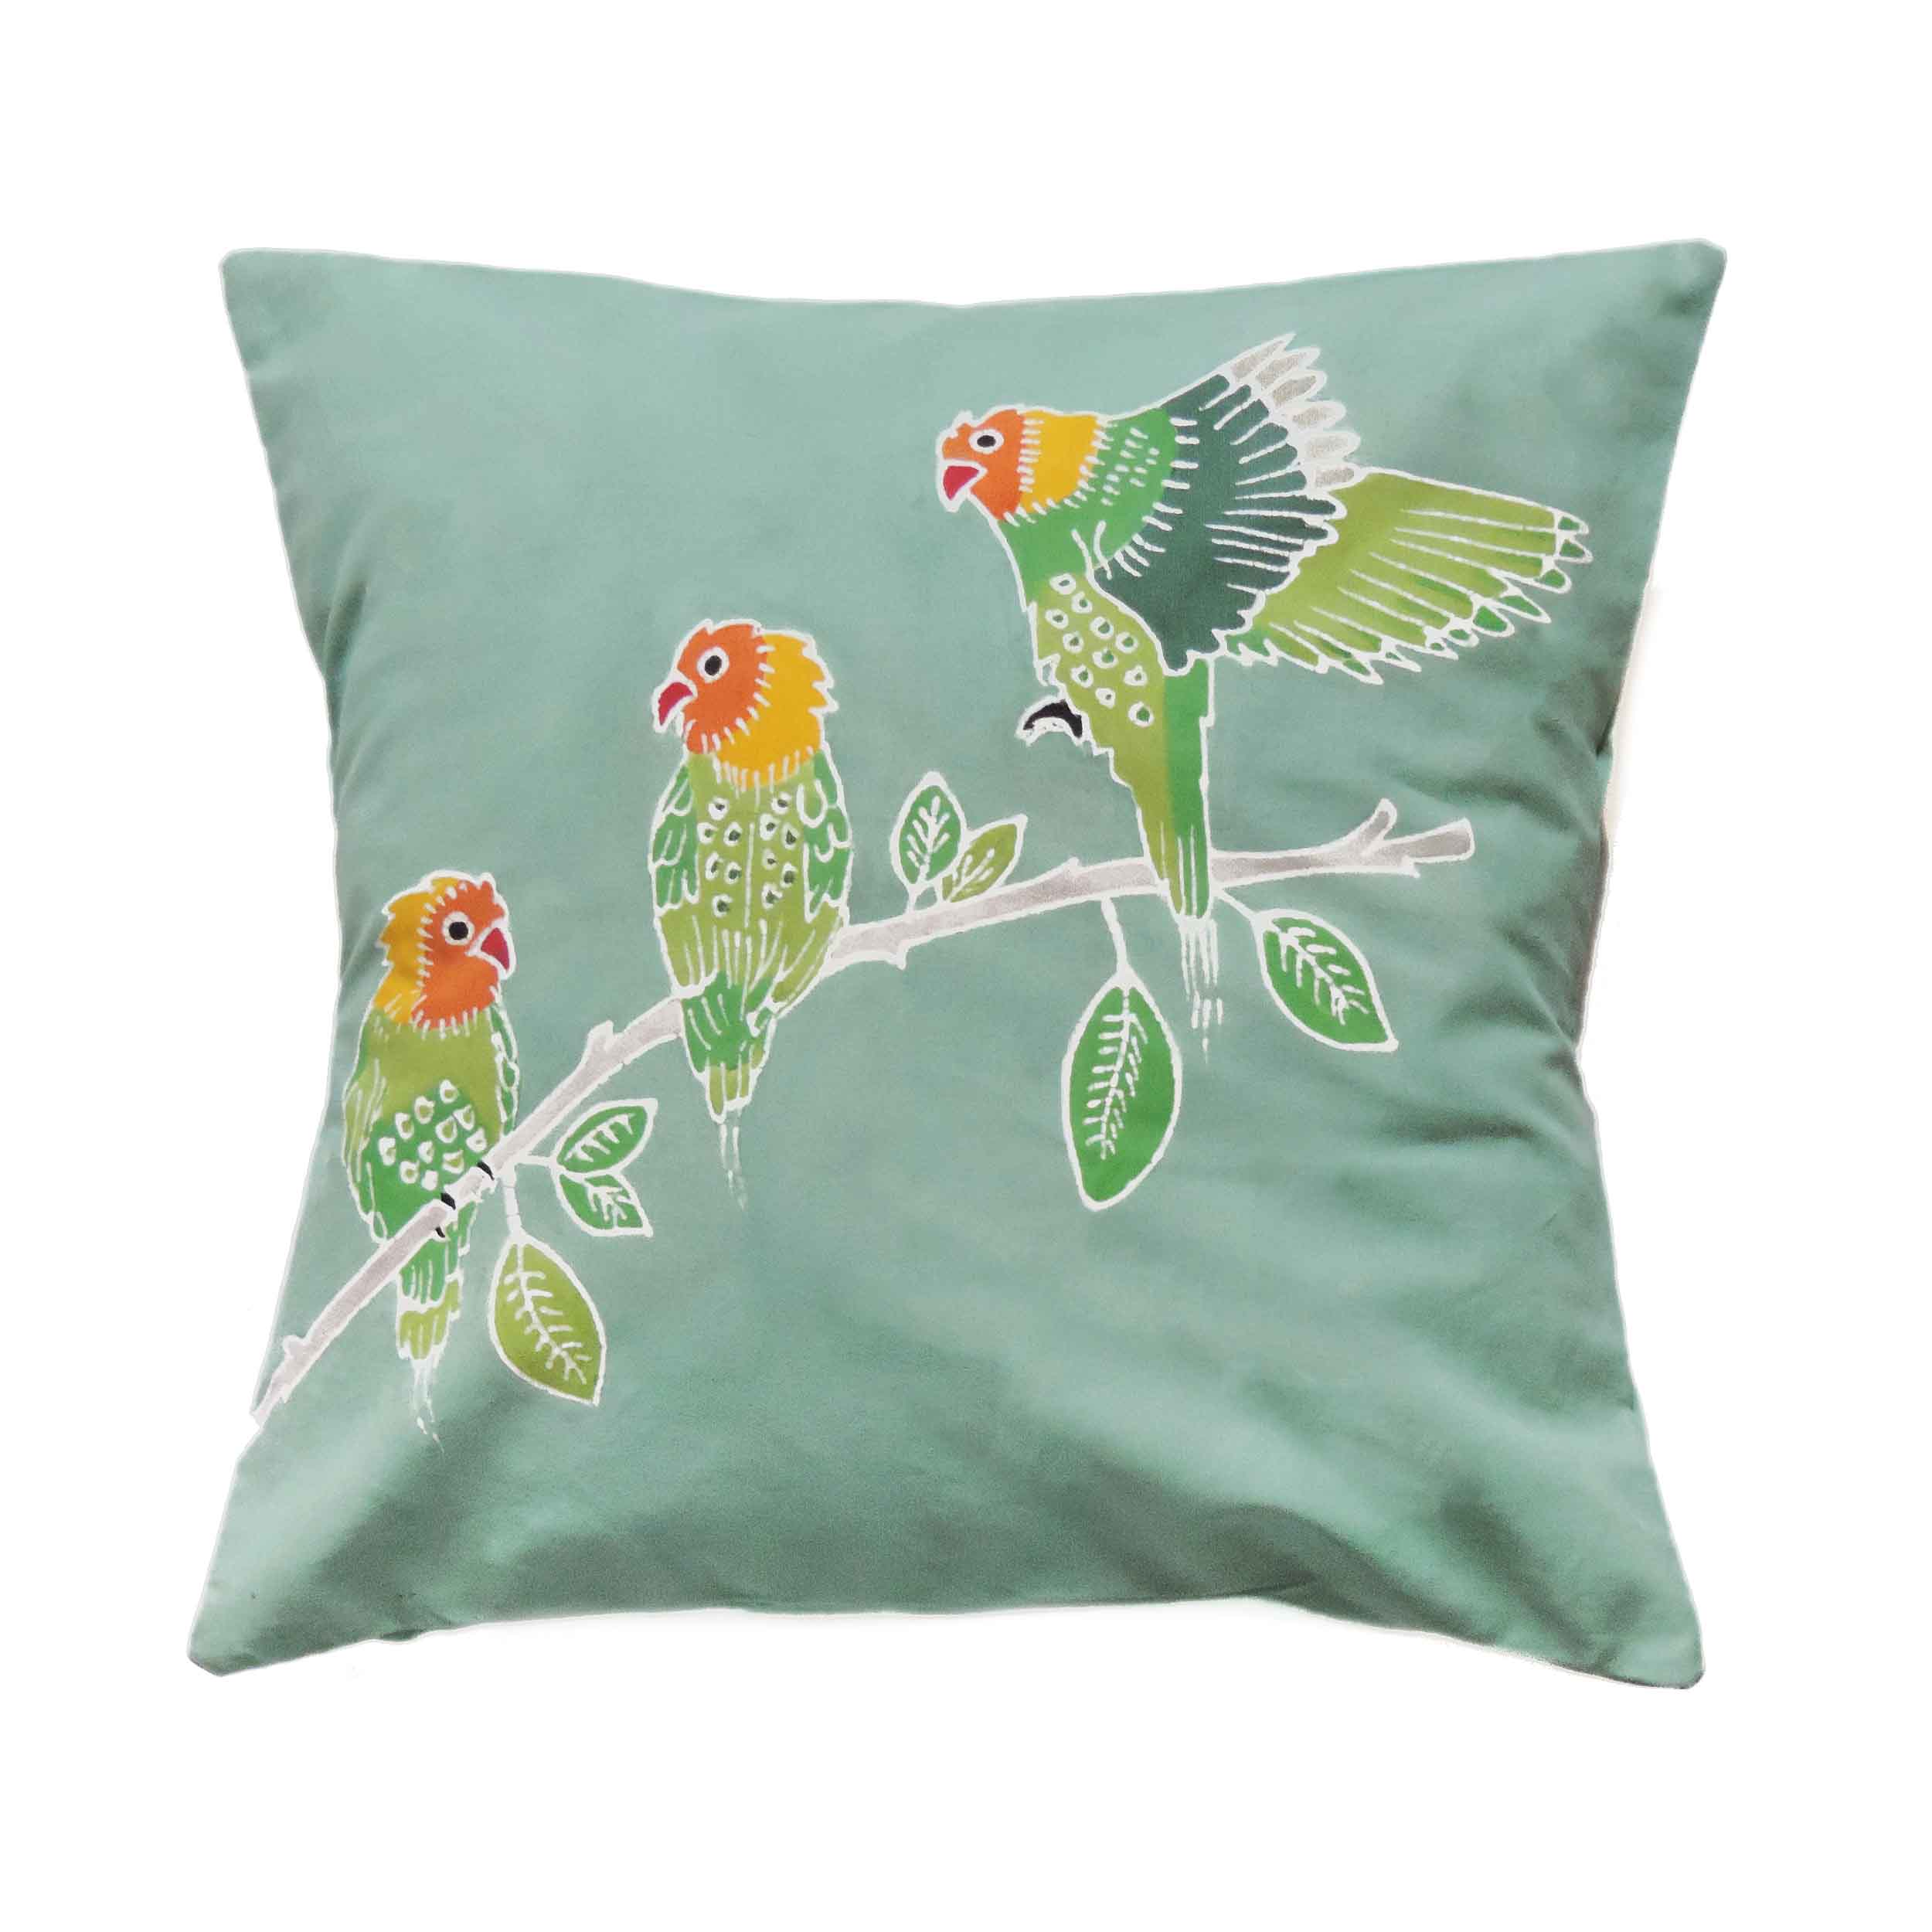 Papiko Lovebird Cushion Cover - Hand Painted by TRIBAL TEXTILES - Handcrafted Home Decor Interiors - African Made